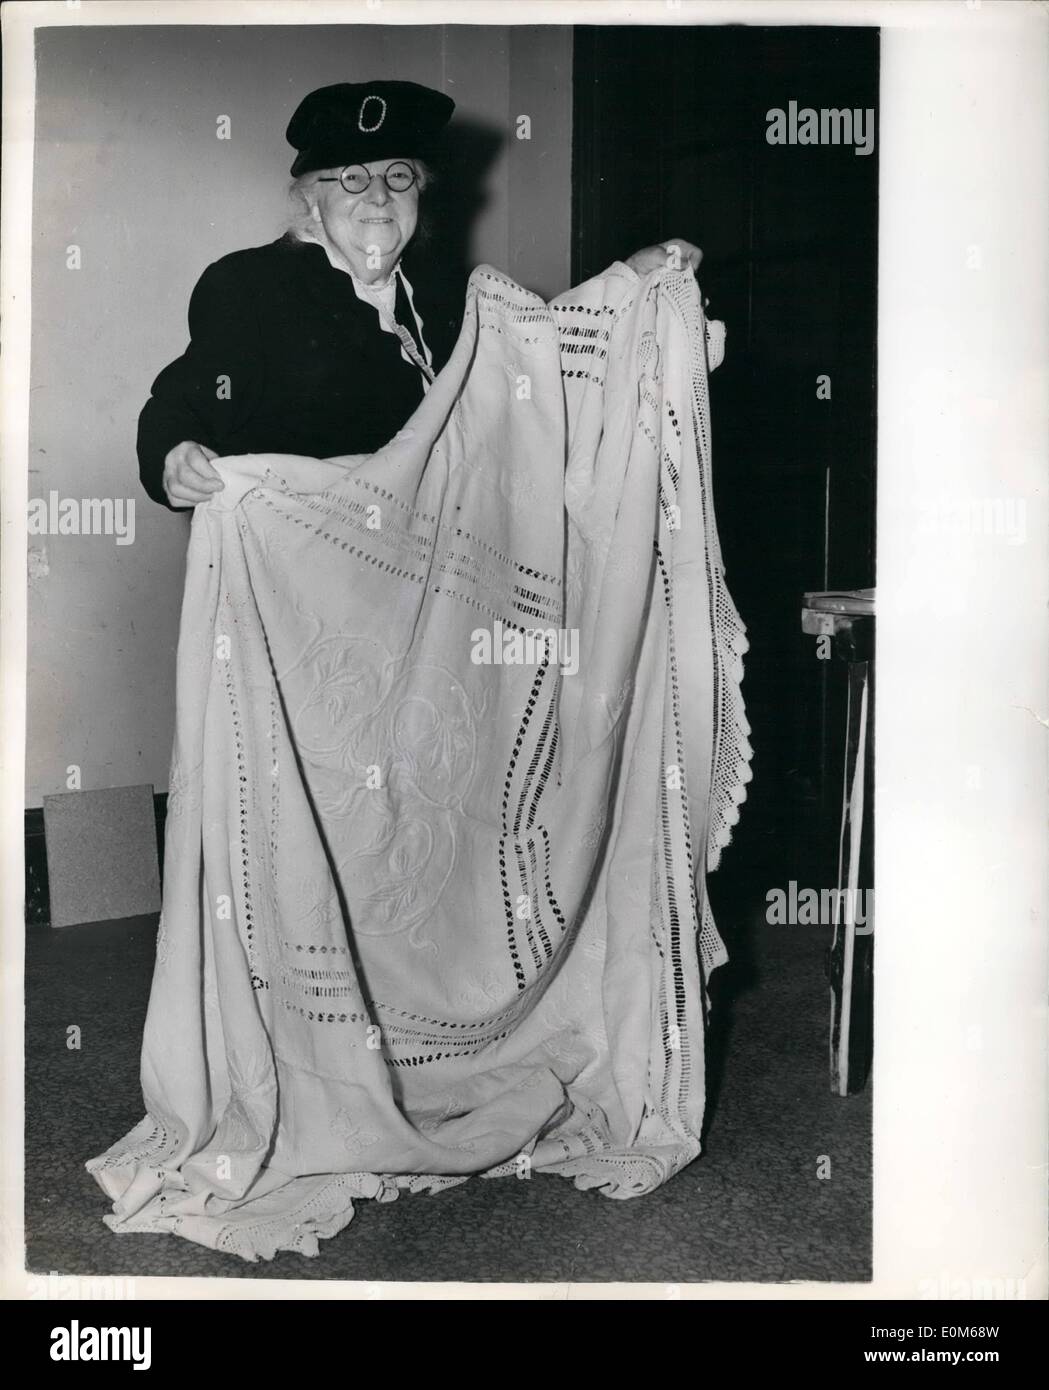 Sep. 09, 1953 - National Handicrafts and hobbies Exhibition. The National Handicrafts and Hobbies Exhibition opened today at the Central Hall, Westminster. Photo Shows Miss A. Bennett, aged 83, of Kensington, seen with her exhibit at the exhibition. It is a bedspread which was started as a linen woven sheet by Miss Bennet's great-great-grandmother for her ''bottom drawer'', and each generation has added something to it. This year Miss Bennet has added 10 yards of lace-edging. Stock Photo